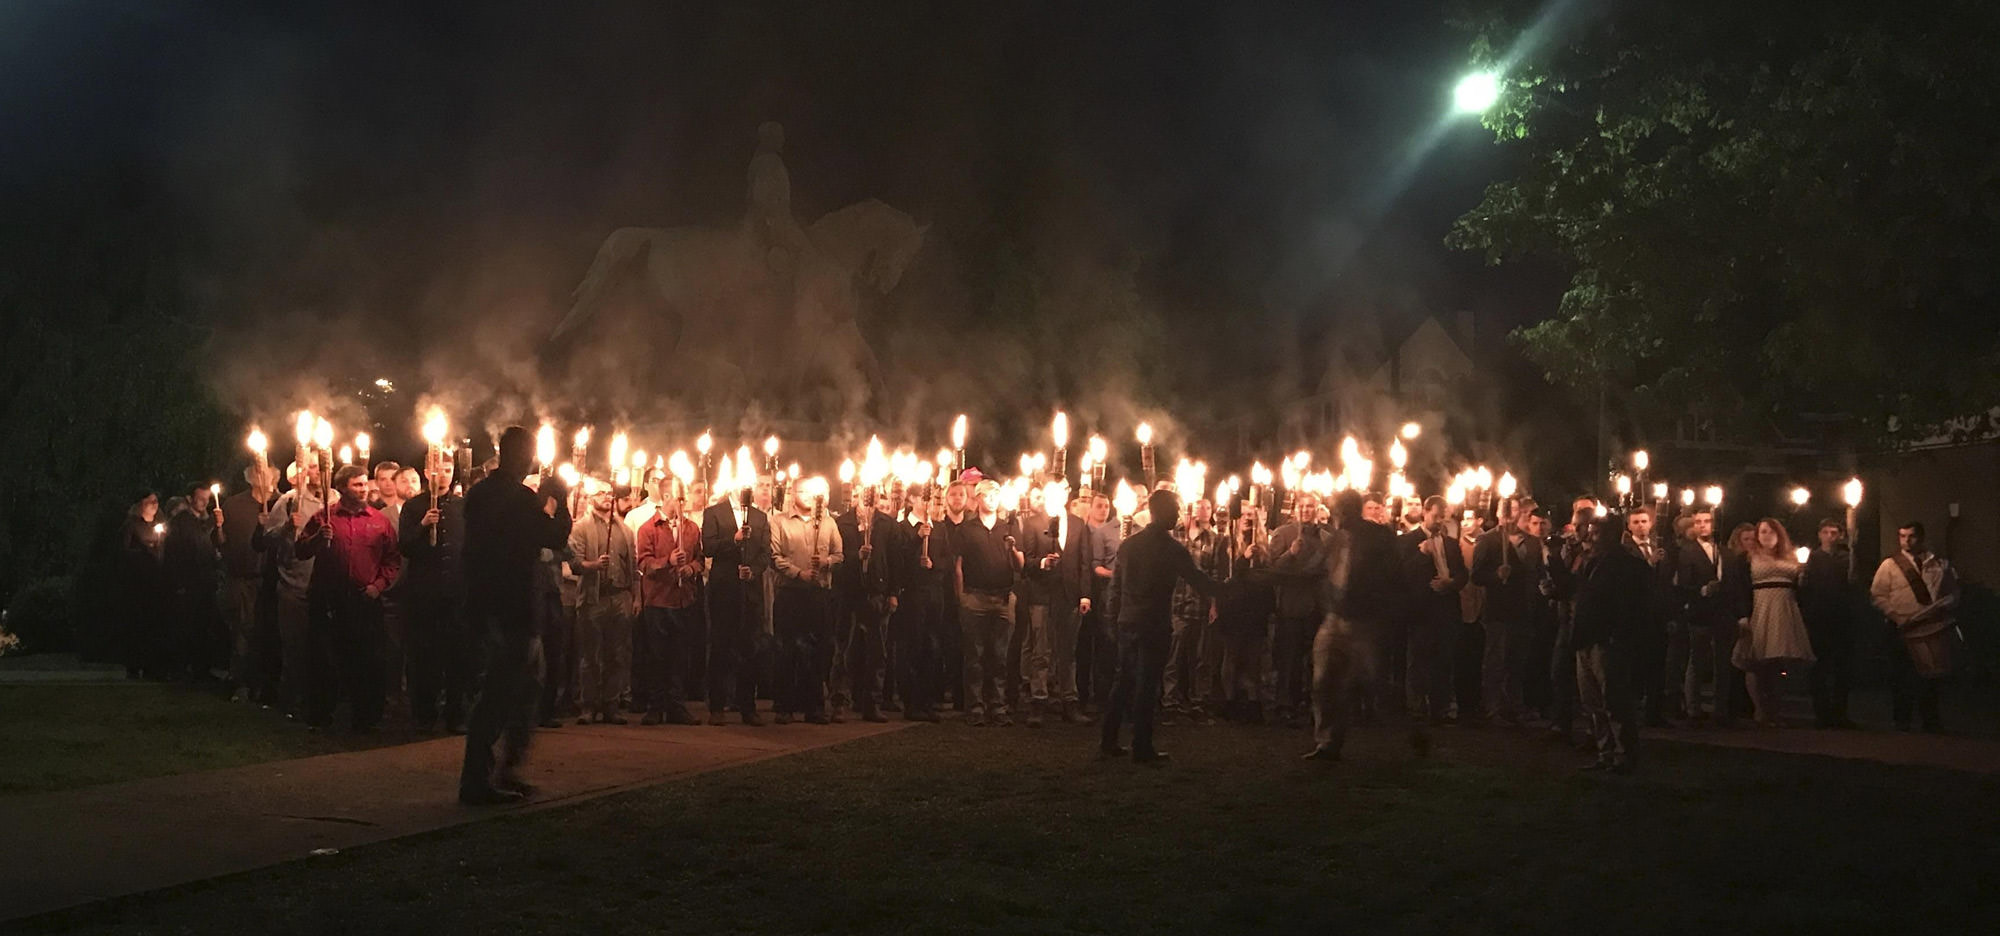 Evil in Charlottesville: White supremacists assembled